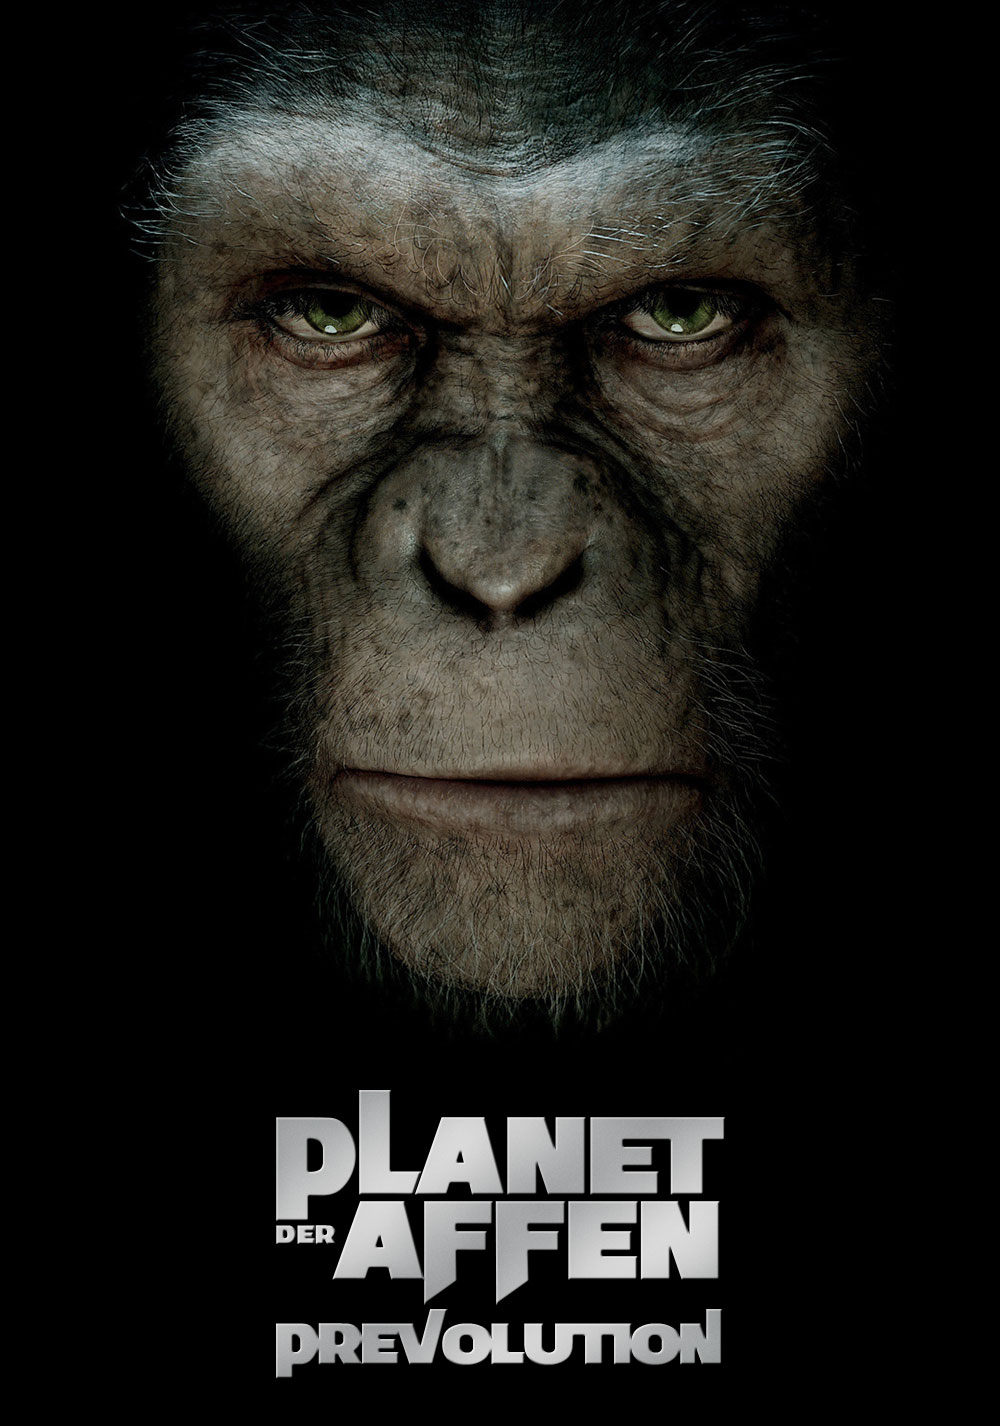 Rise Of The Planet Of The Apes Art